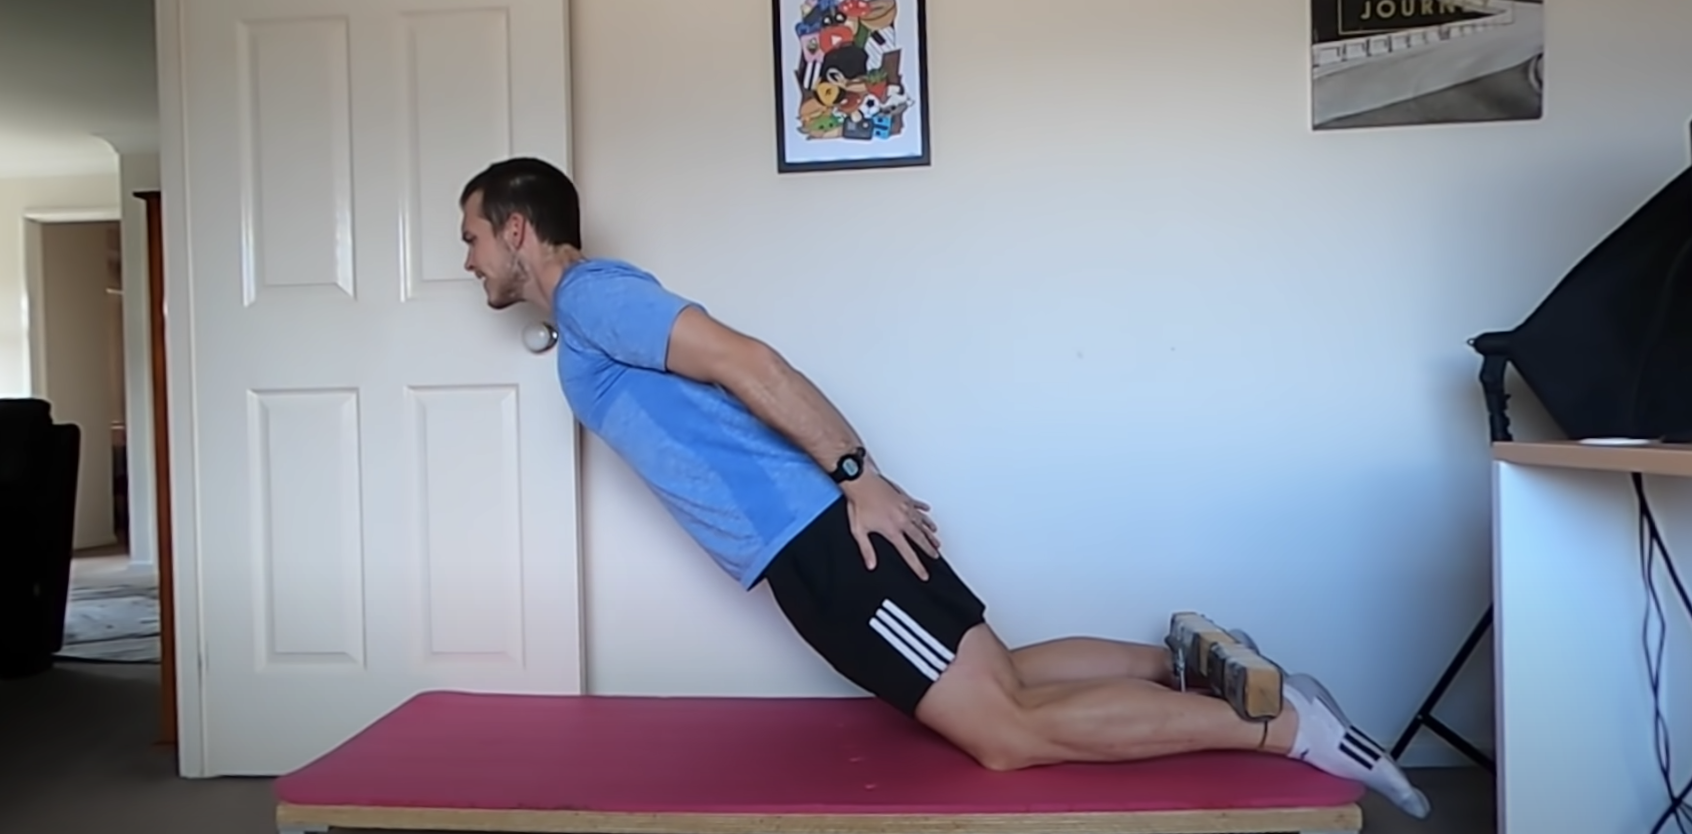 Watch This Guy Take a Month-Long Nordic Hamstring Curl Challenge